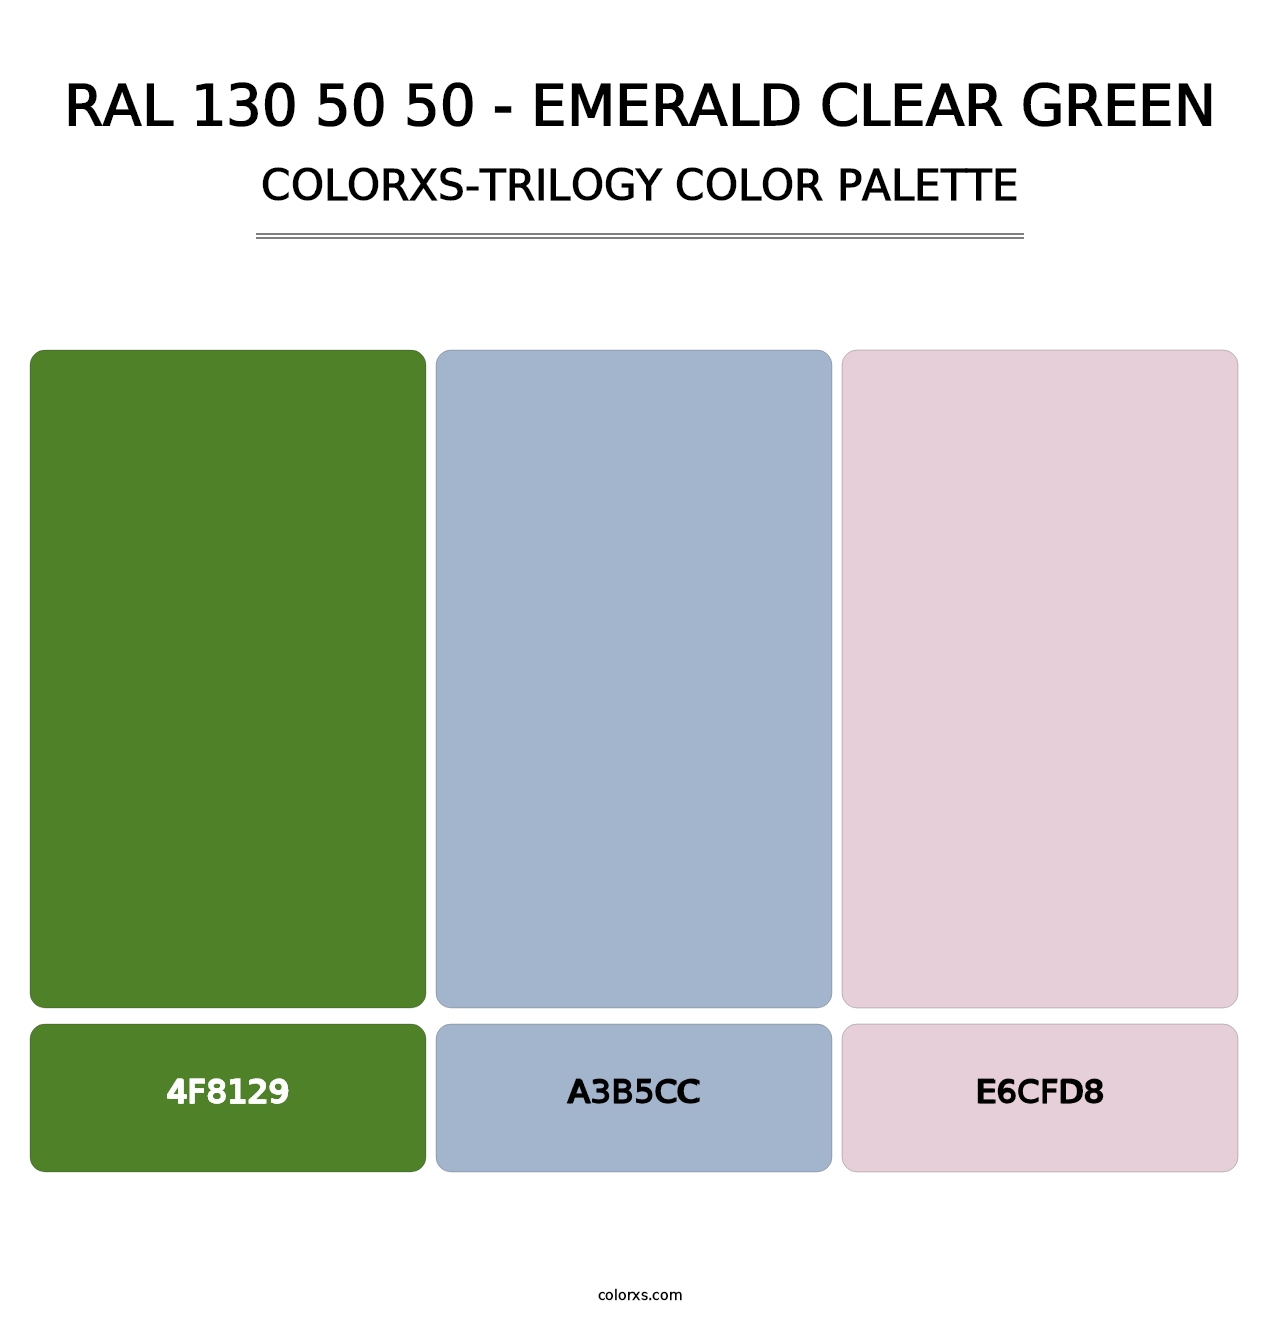 RAL 130 50 50 - Emerald Clear Green - Colorxs Trilogy Palette